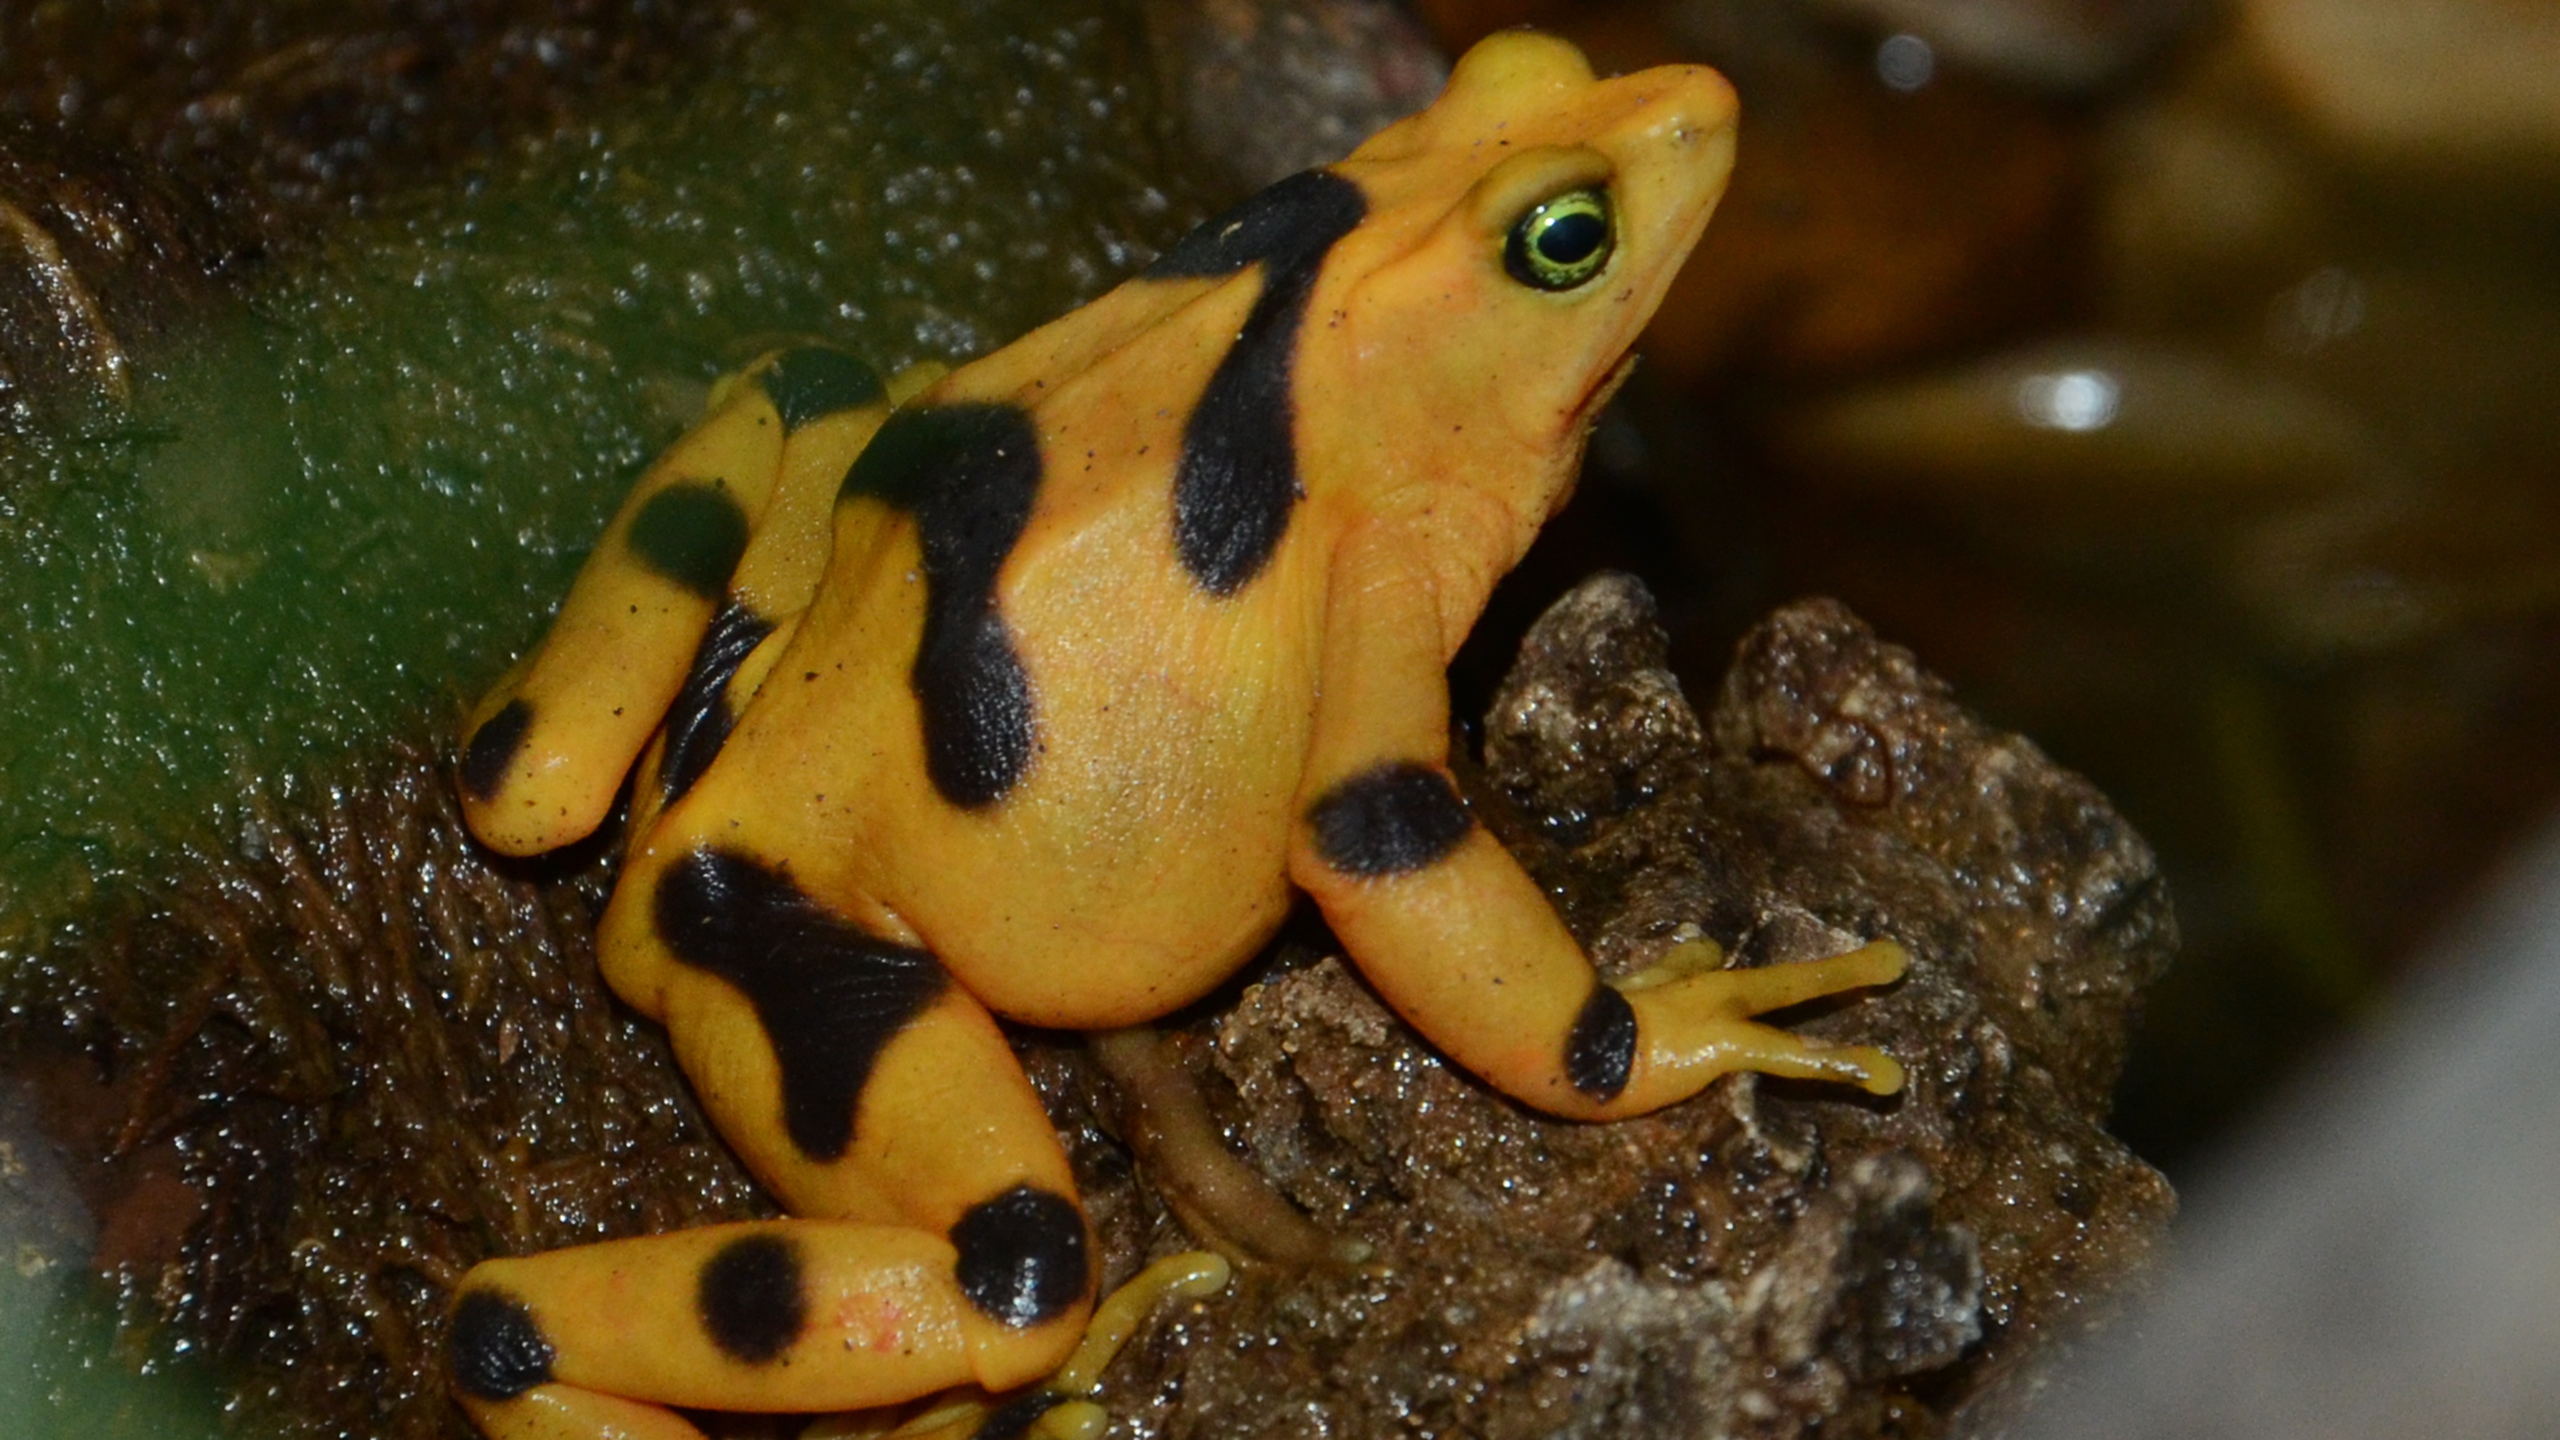 The "golden frog" from Panama, Atelopus zeteki, has not been found in the wild since 2009; fortunately, there is a successful conservation breeding project for this species that may mean its salvation. | Heiko Werning